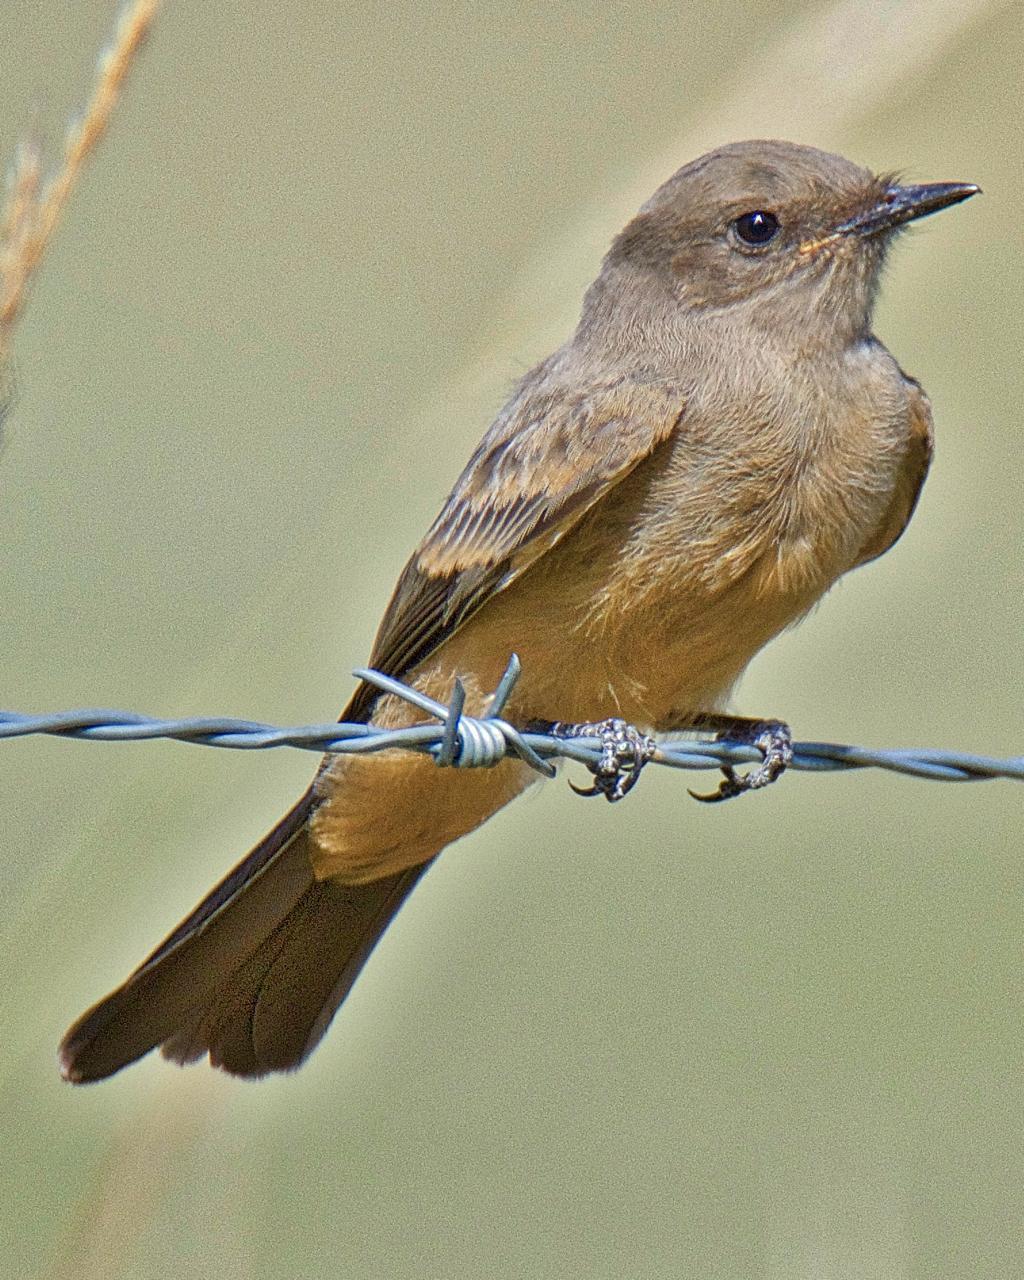 Say's Phoebe Photo by Brian Avent